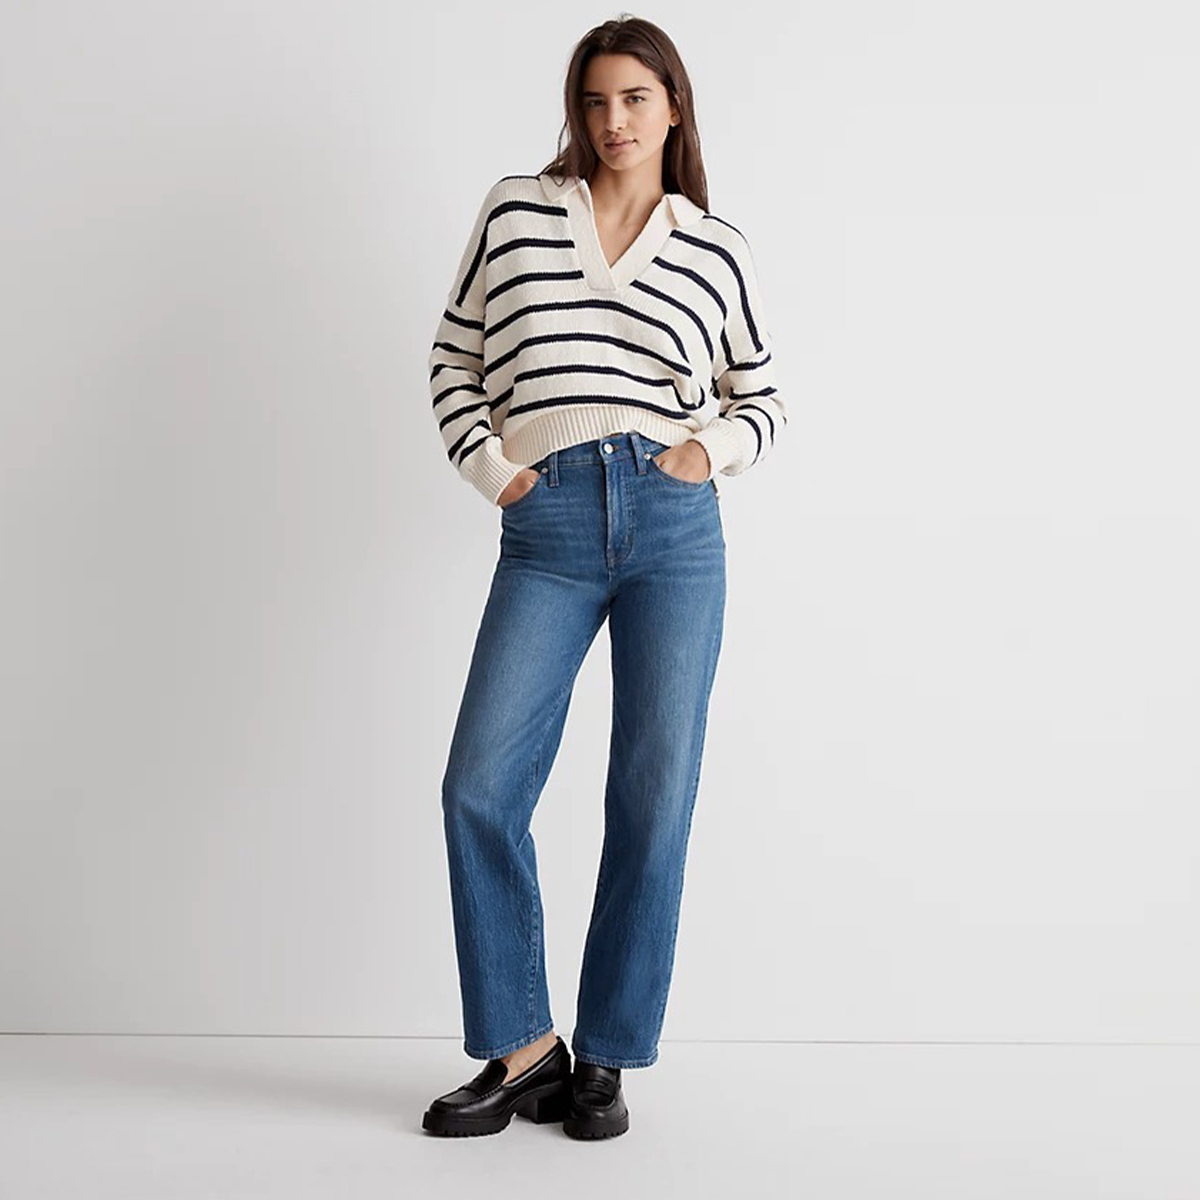 16 Madewell Items to Add to Your Winter Wardrobe | Who What Wear